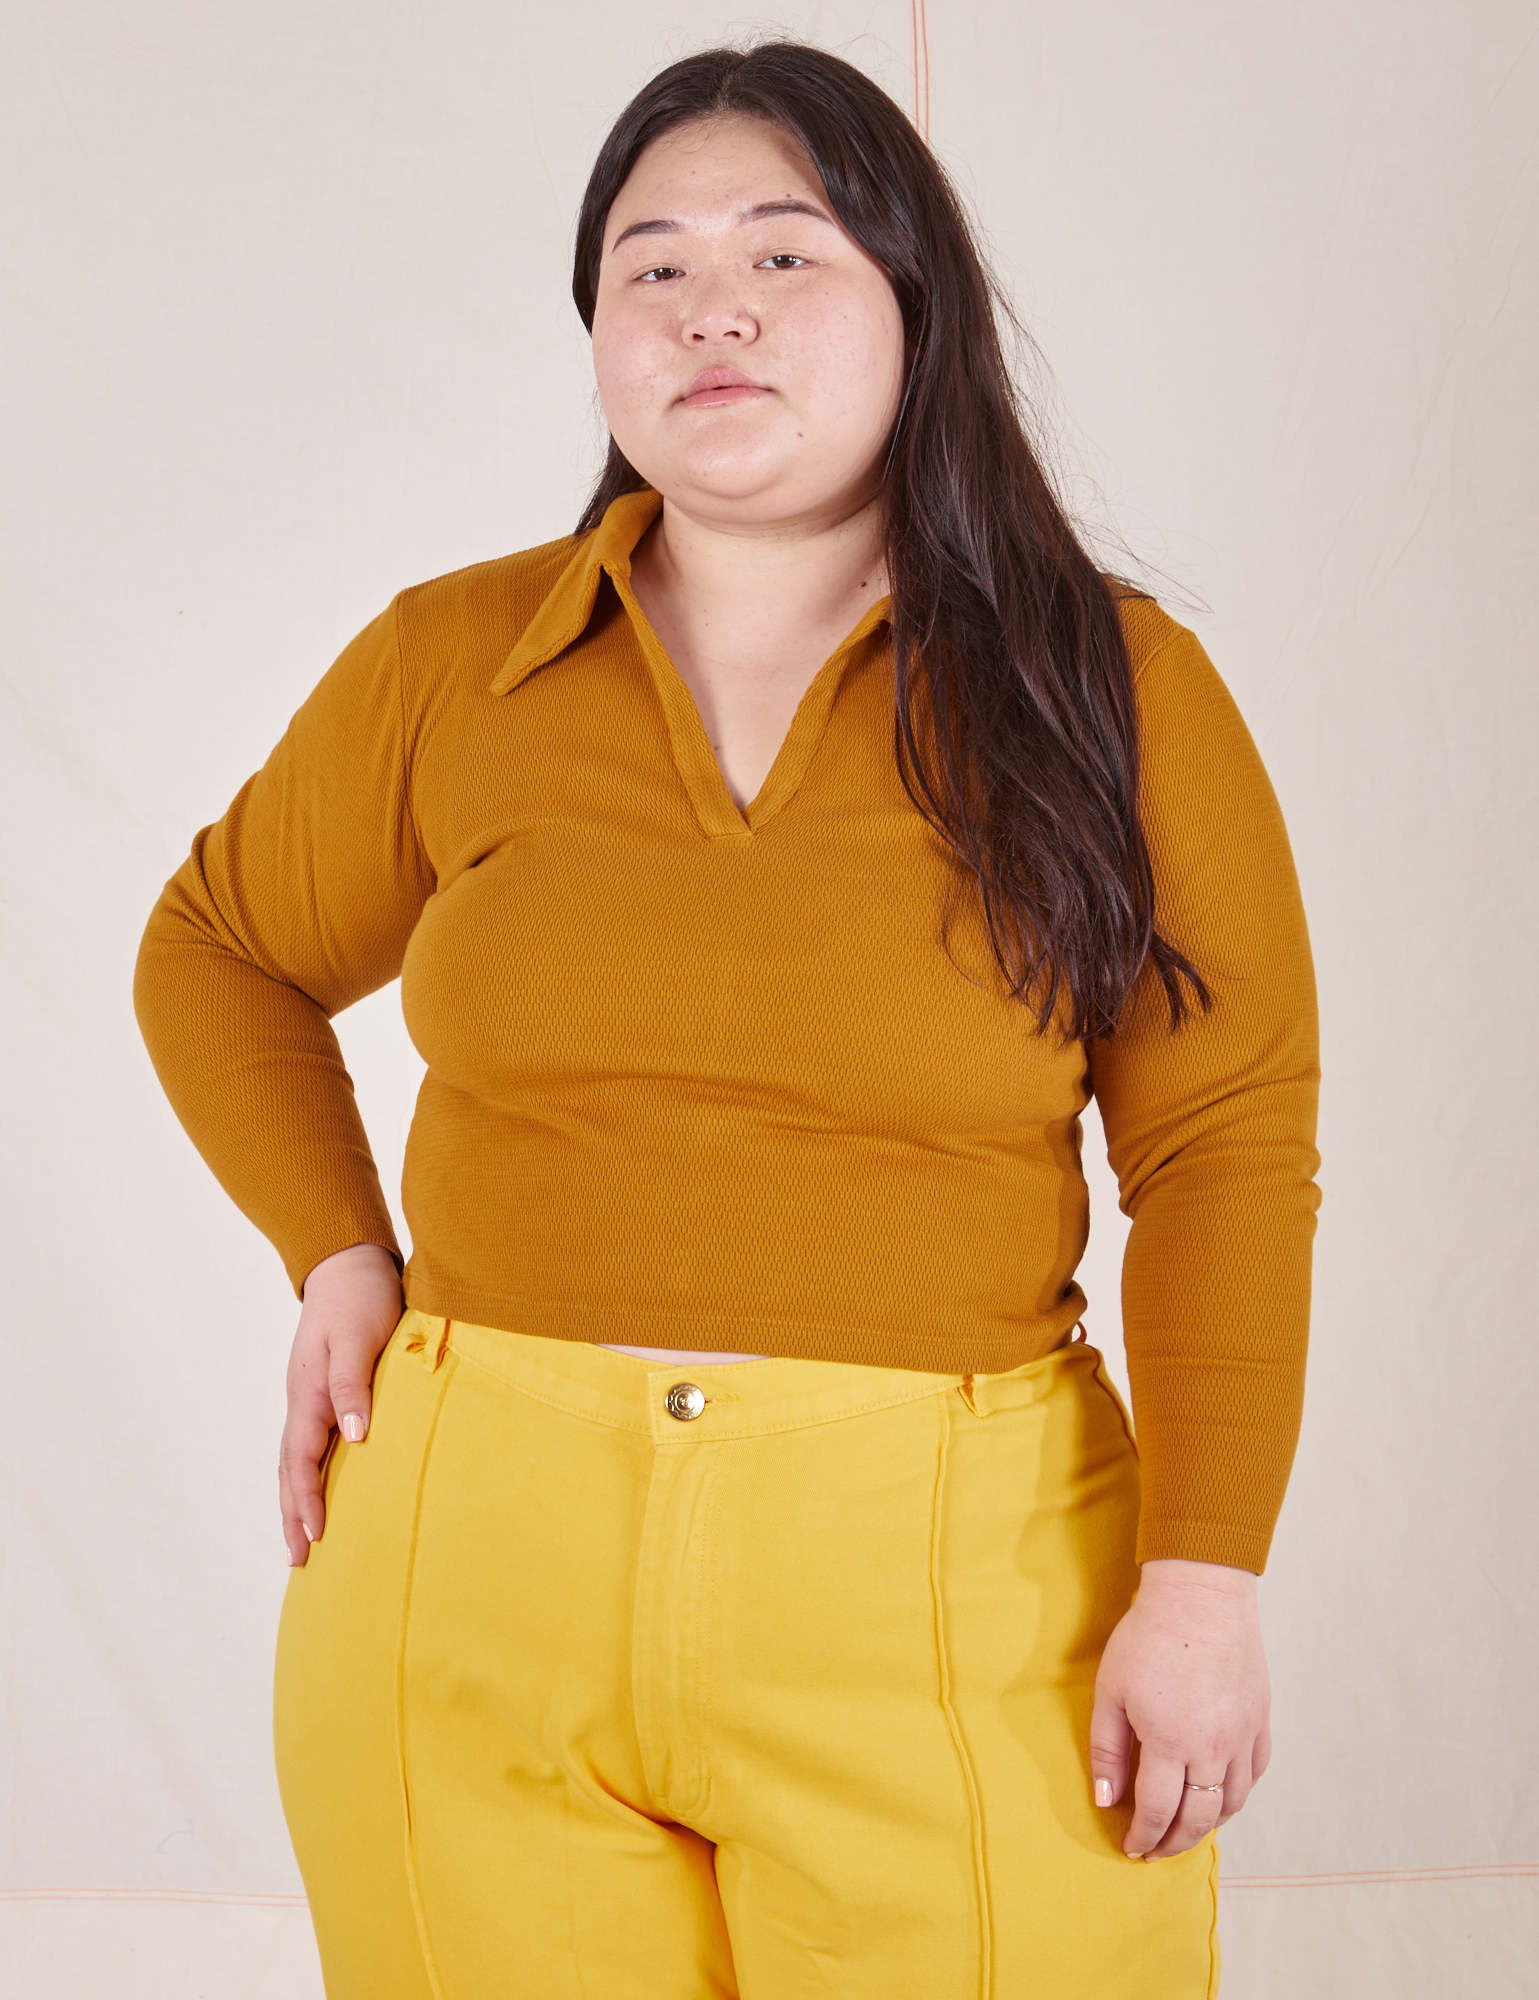 Ashley is wearing size L Long Sleeve Fisherman Polo in Spicy Mustard